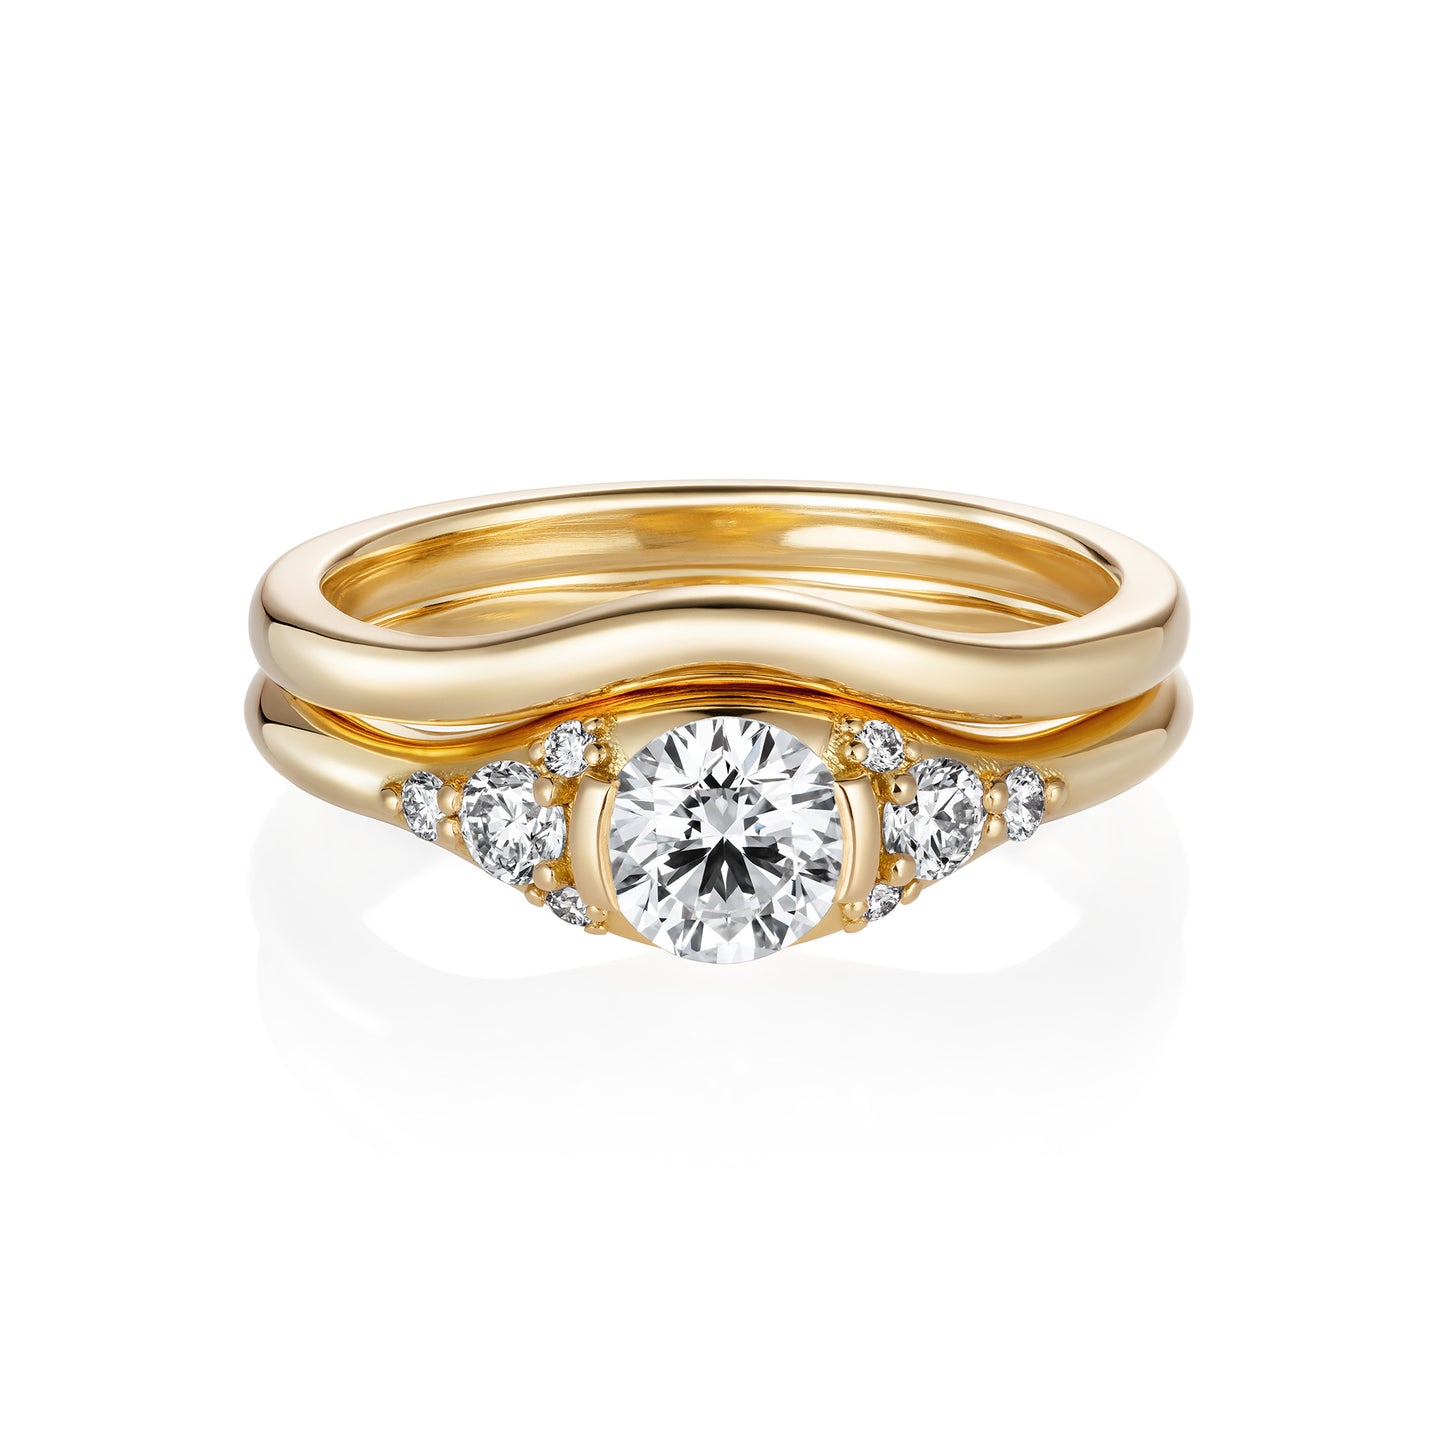 18ct yellow gold scattered diamond ring featuring fitted wedding band